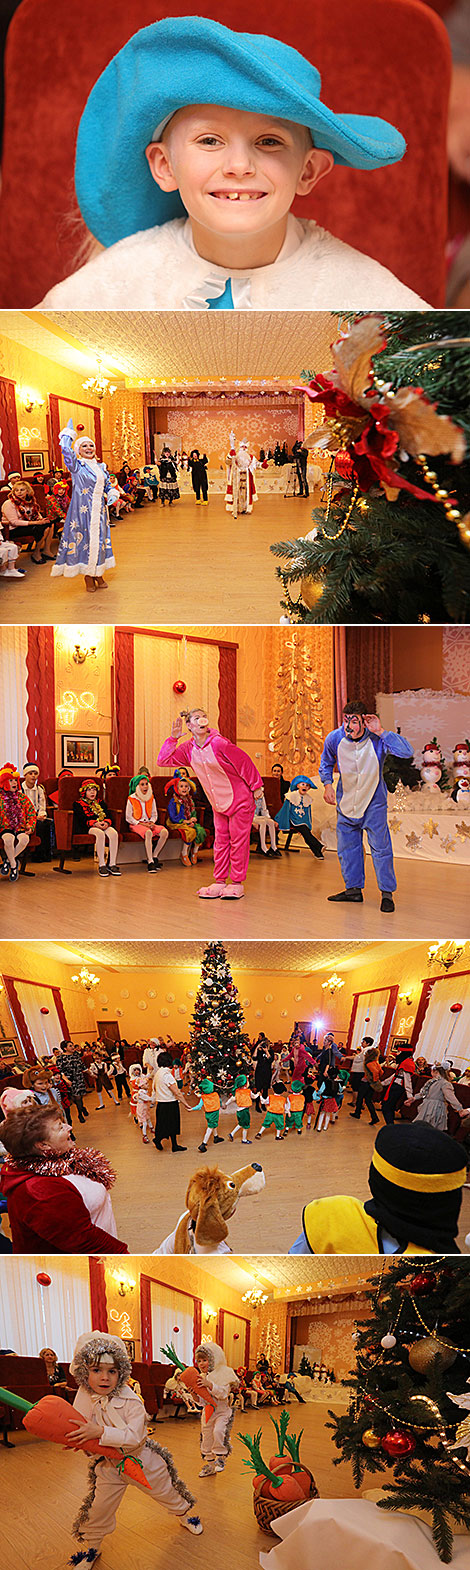 Our Children charity campaign in the Rudensk orphanage